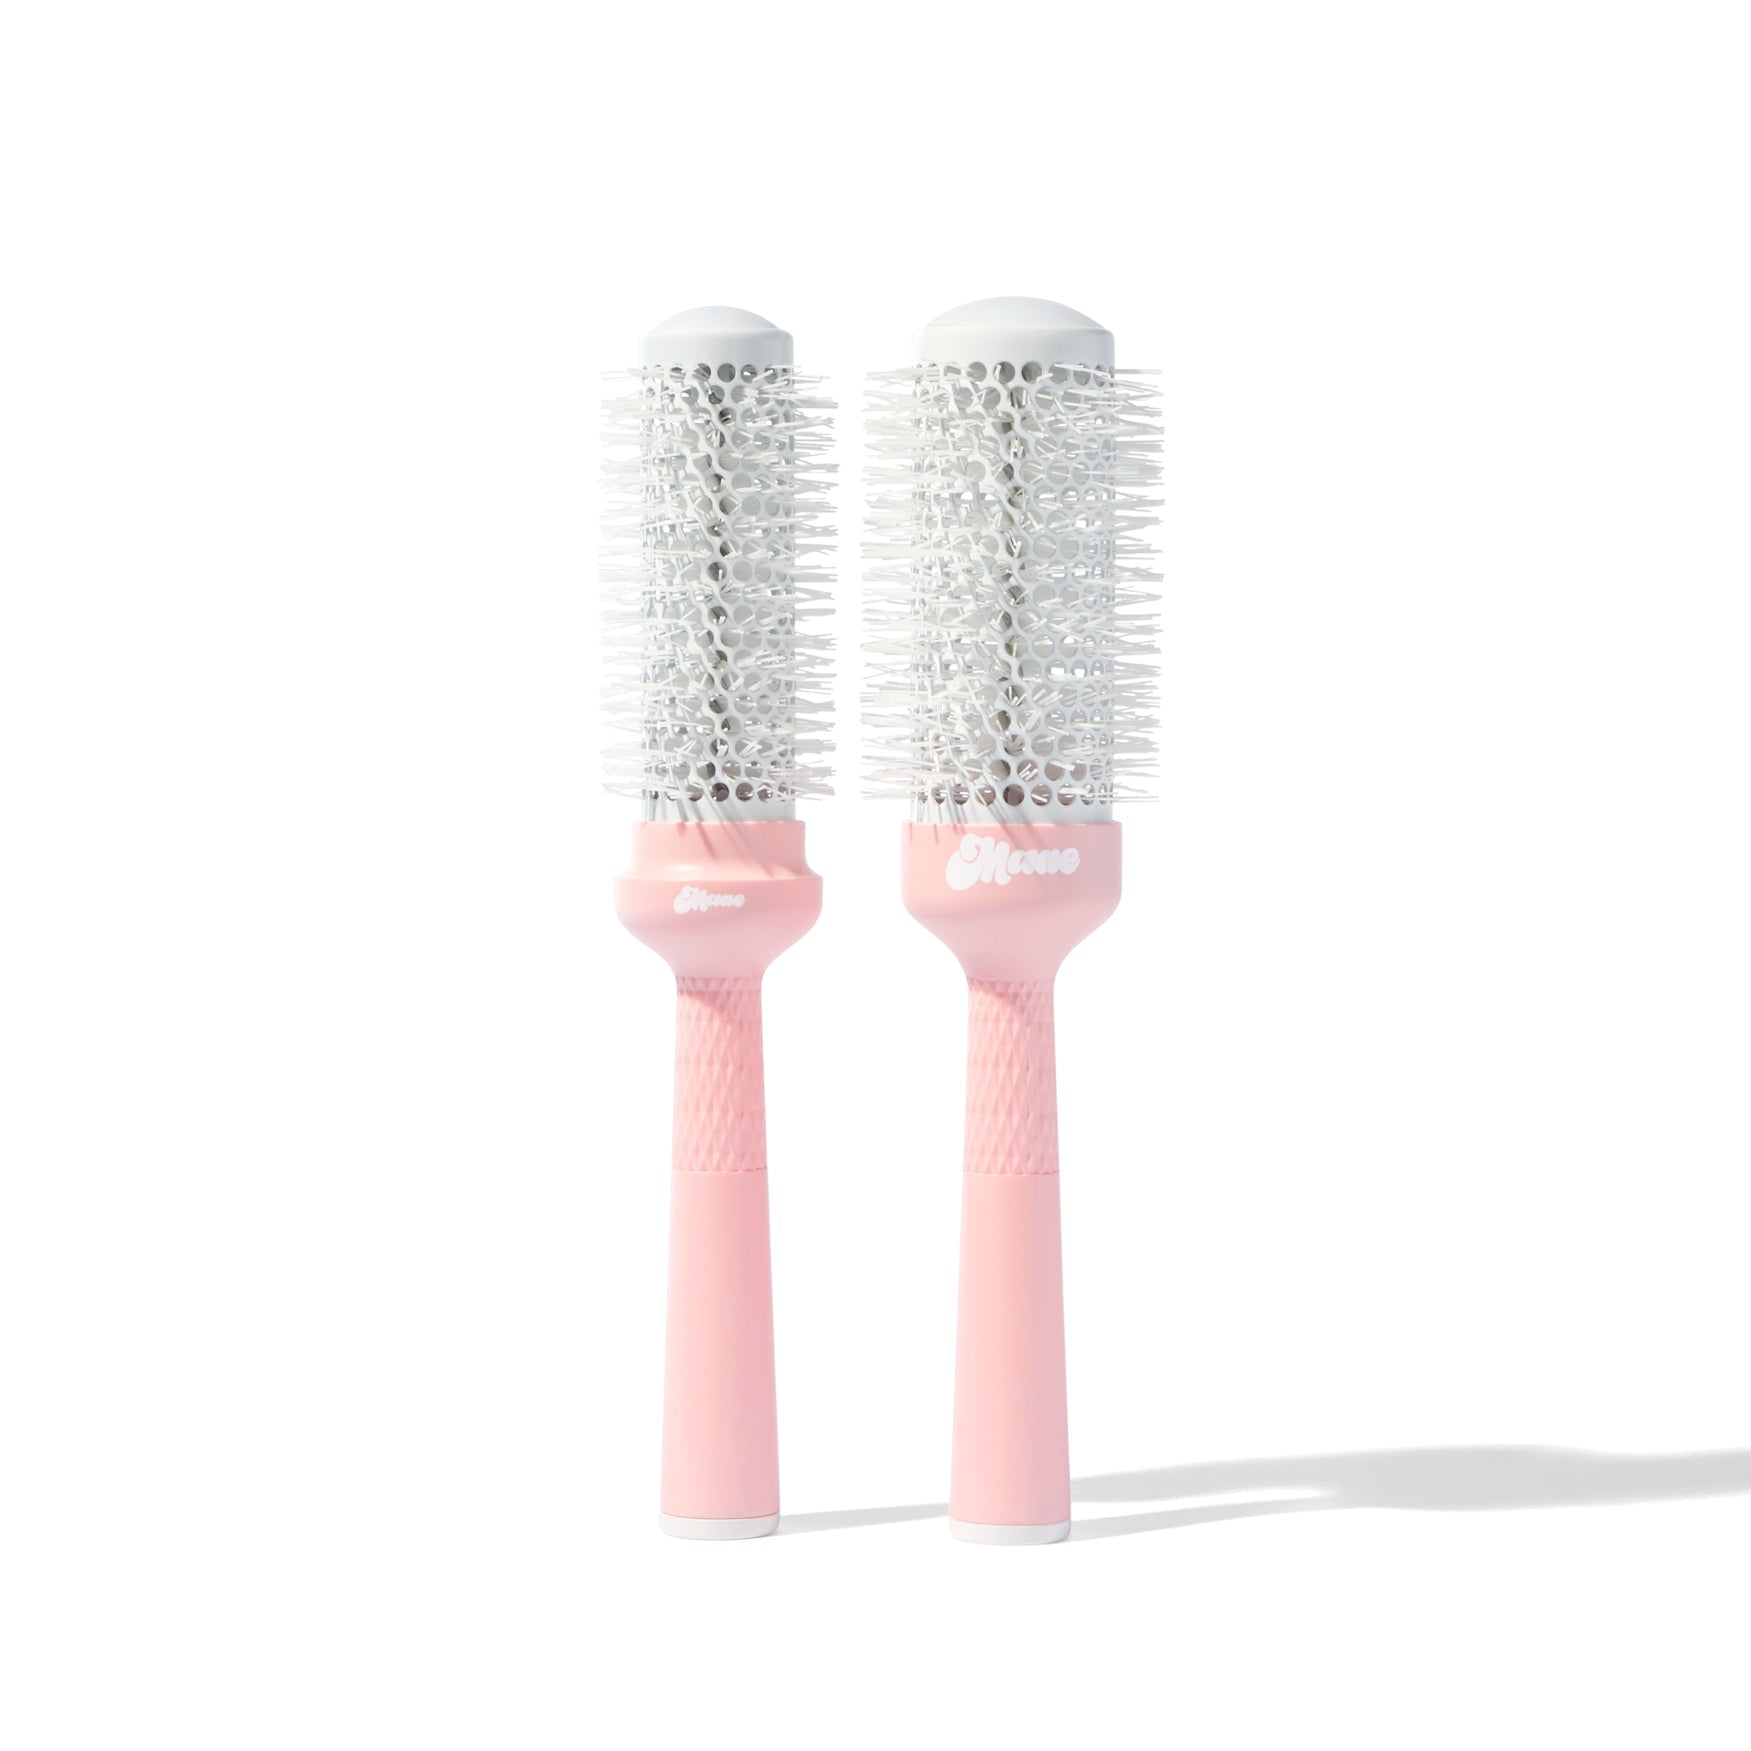 mane by mane addicts BRB Ceramic Round Brush 33mm (1.3") and 43mm (1.7")